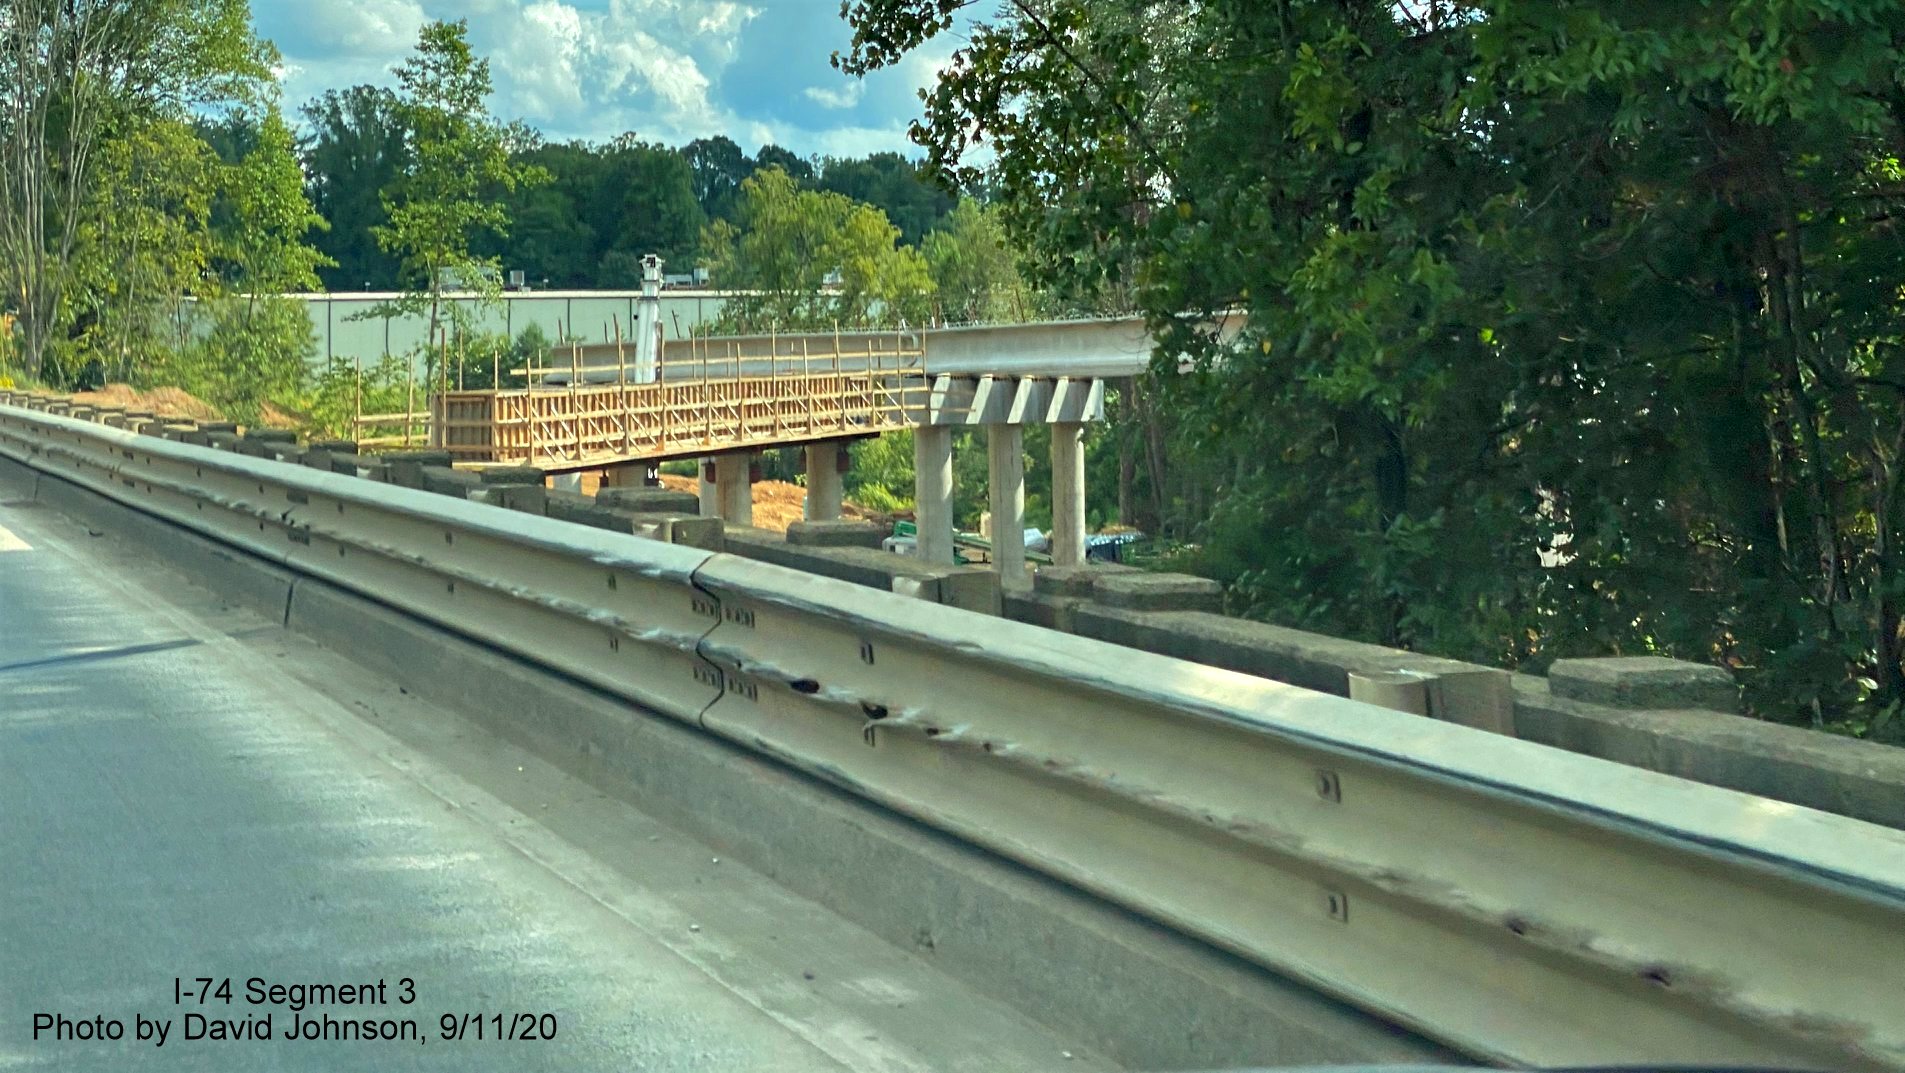 Image of future US 52 South bridge over railroad tracks being constructed, part of future I-74 Winston Salem Northern Beltway interchange construction, by David Johnson September 2020